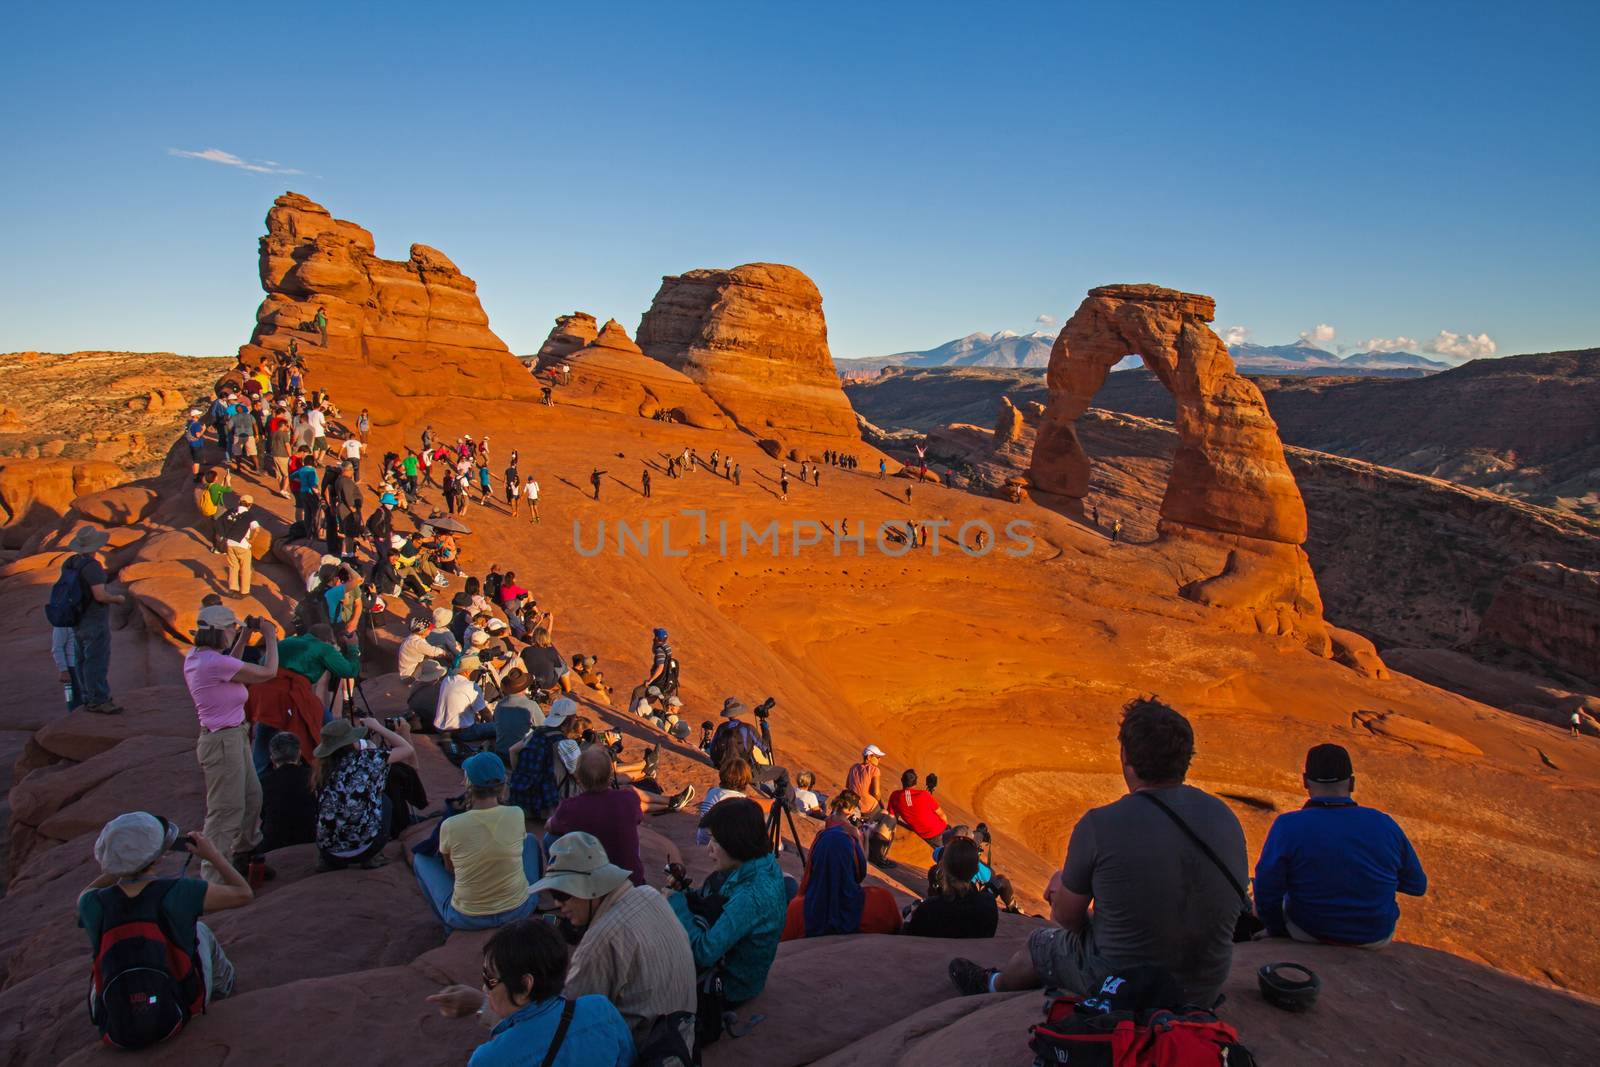 The Sunset Crowd at Delicate Arch by kobus_peche